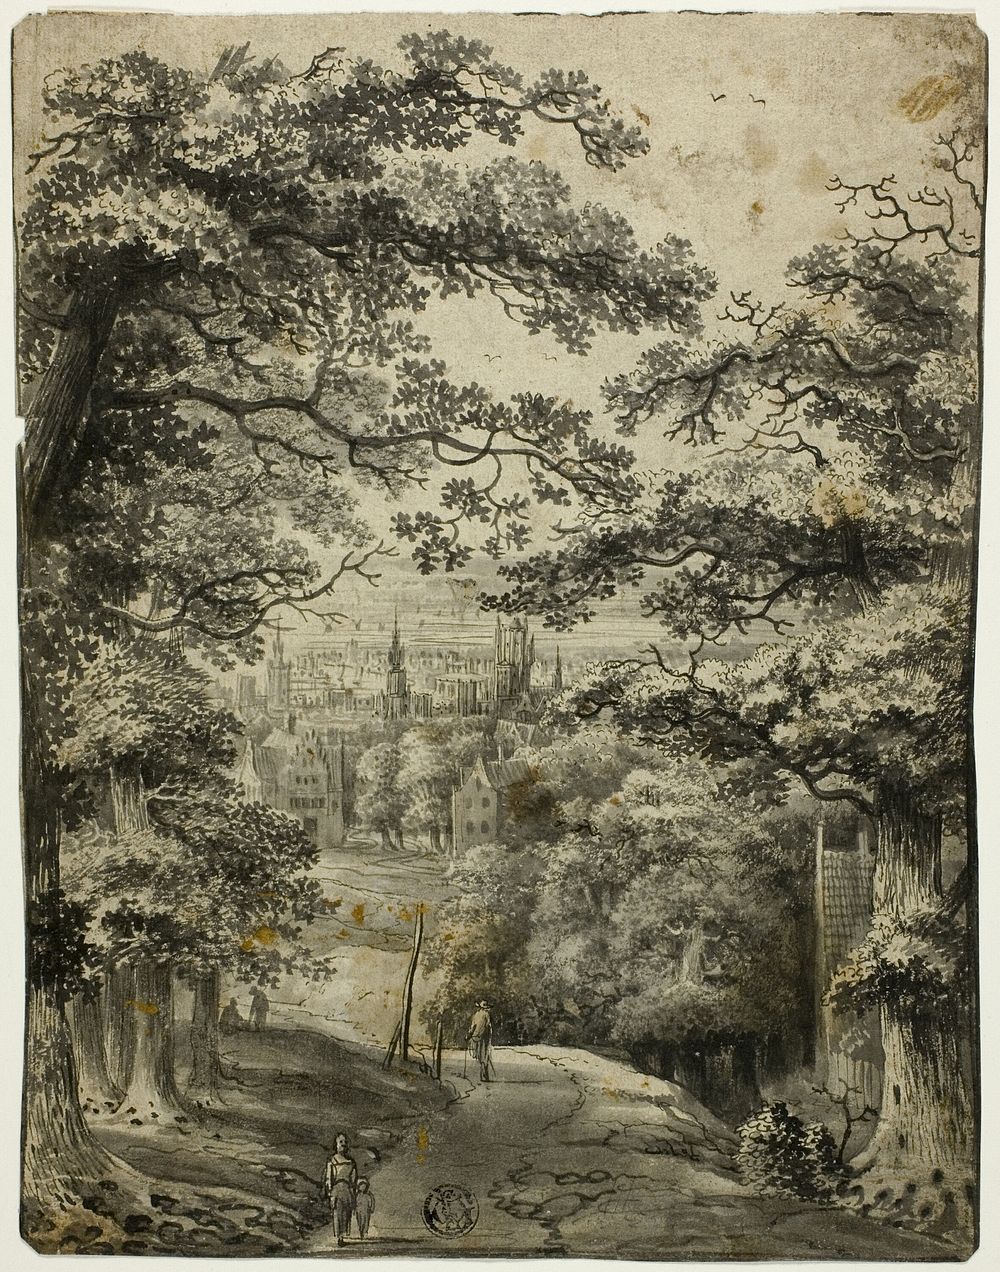 View of City from Road on Hill by Jan Looten